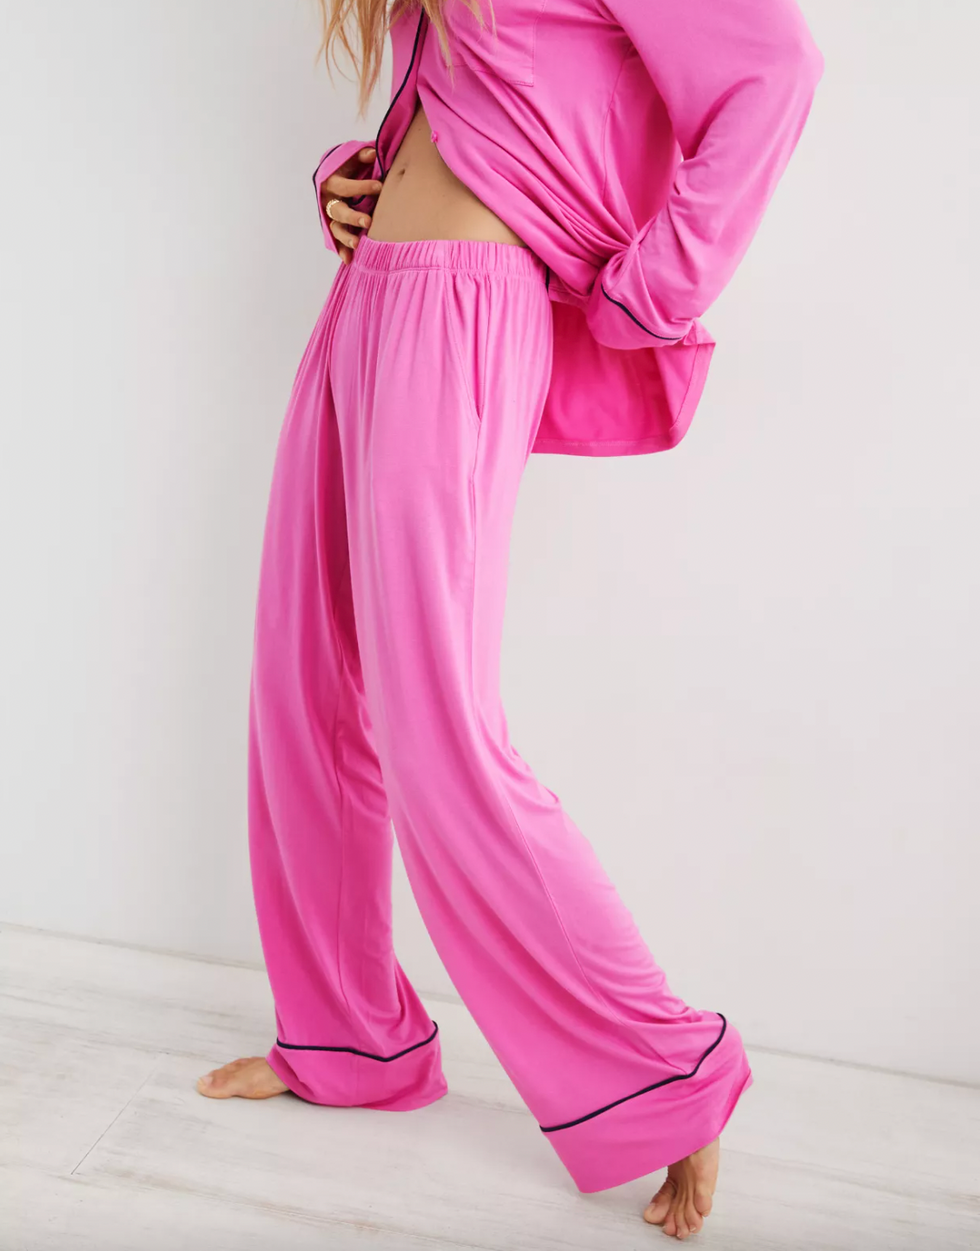 Plus Size Women's Relaxed Pajama Pant by Dreams & Co. in Classic